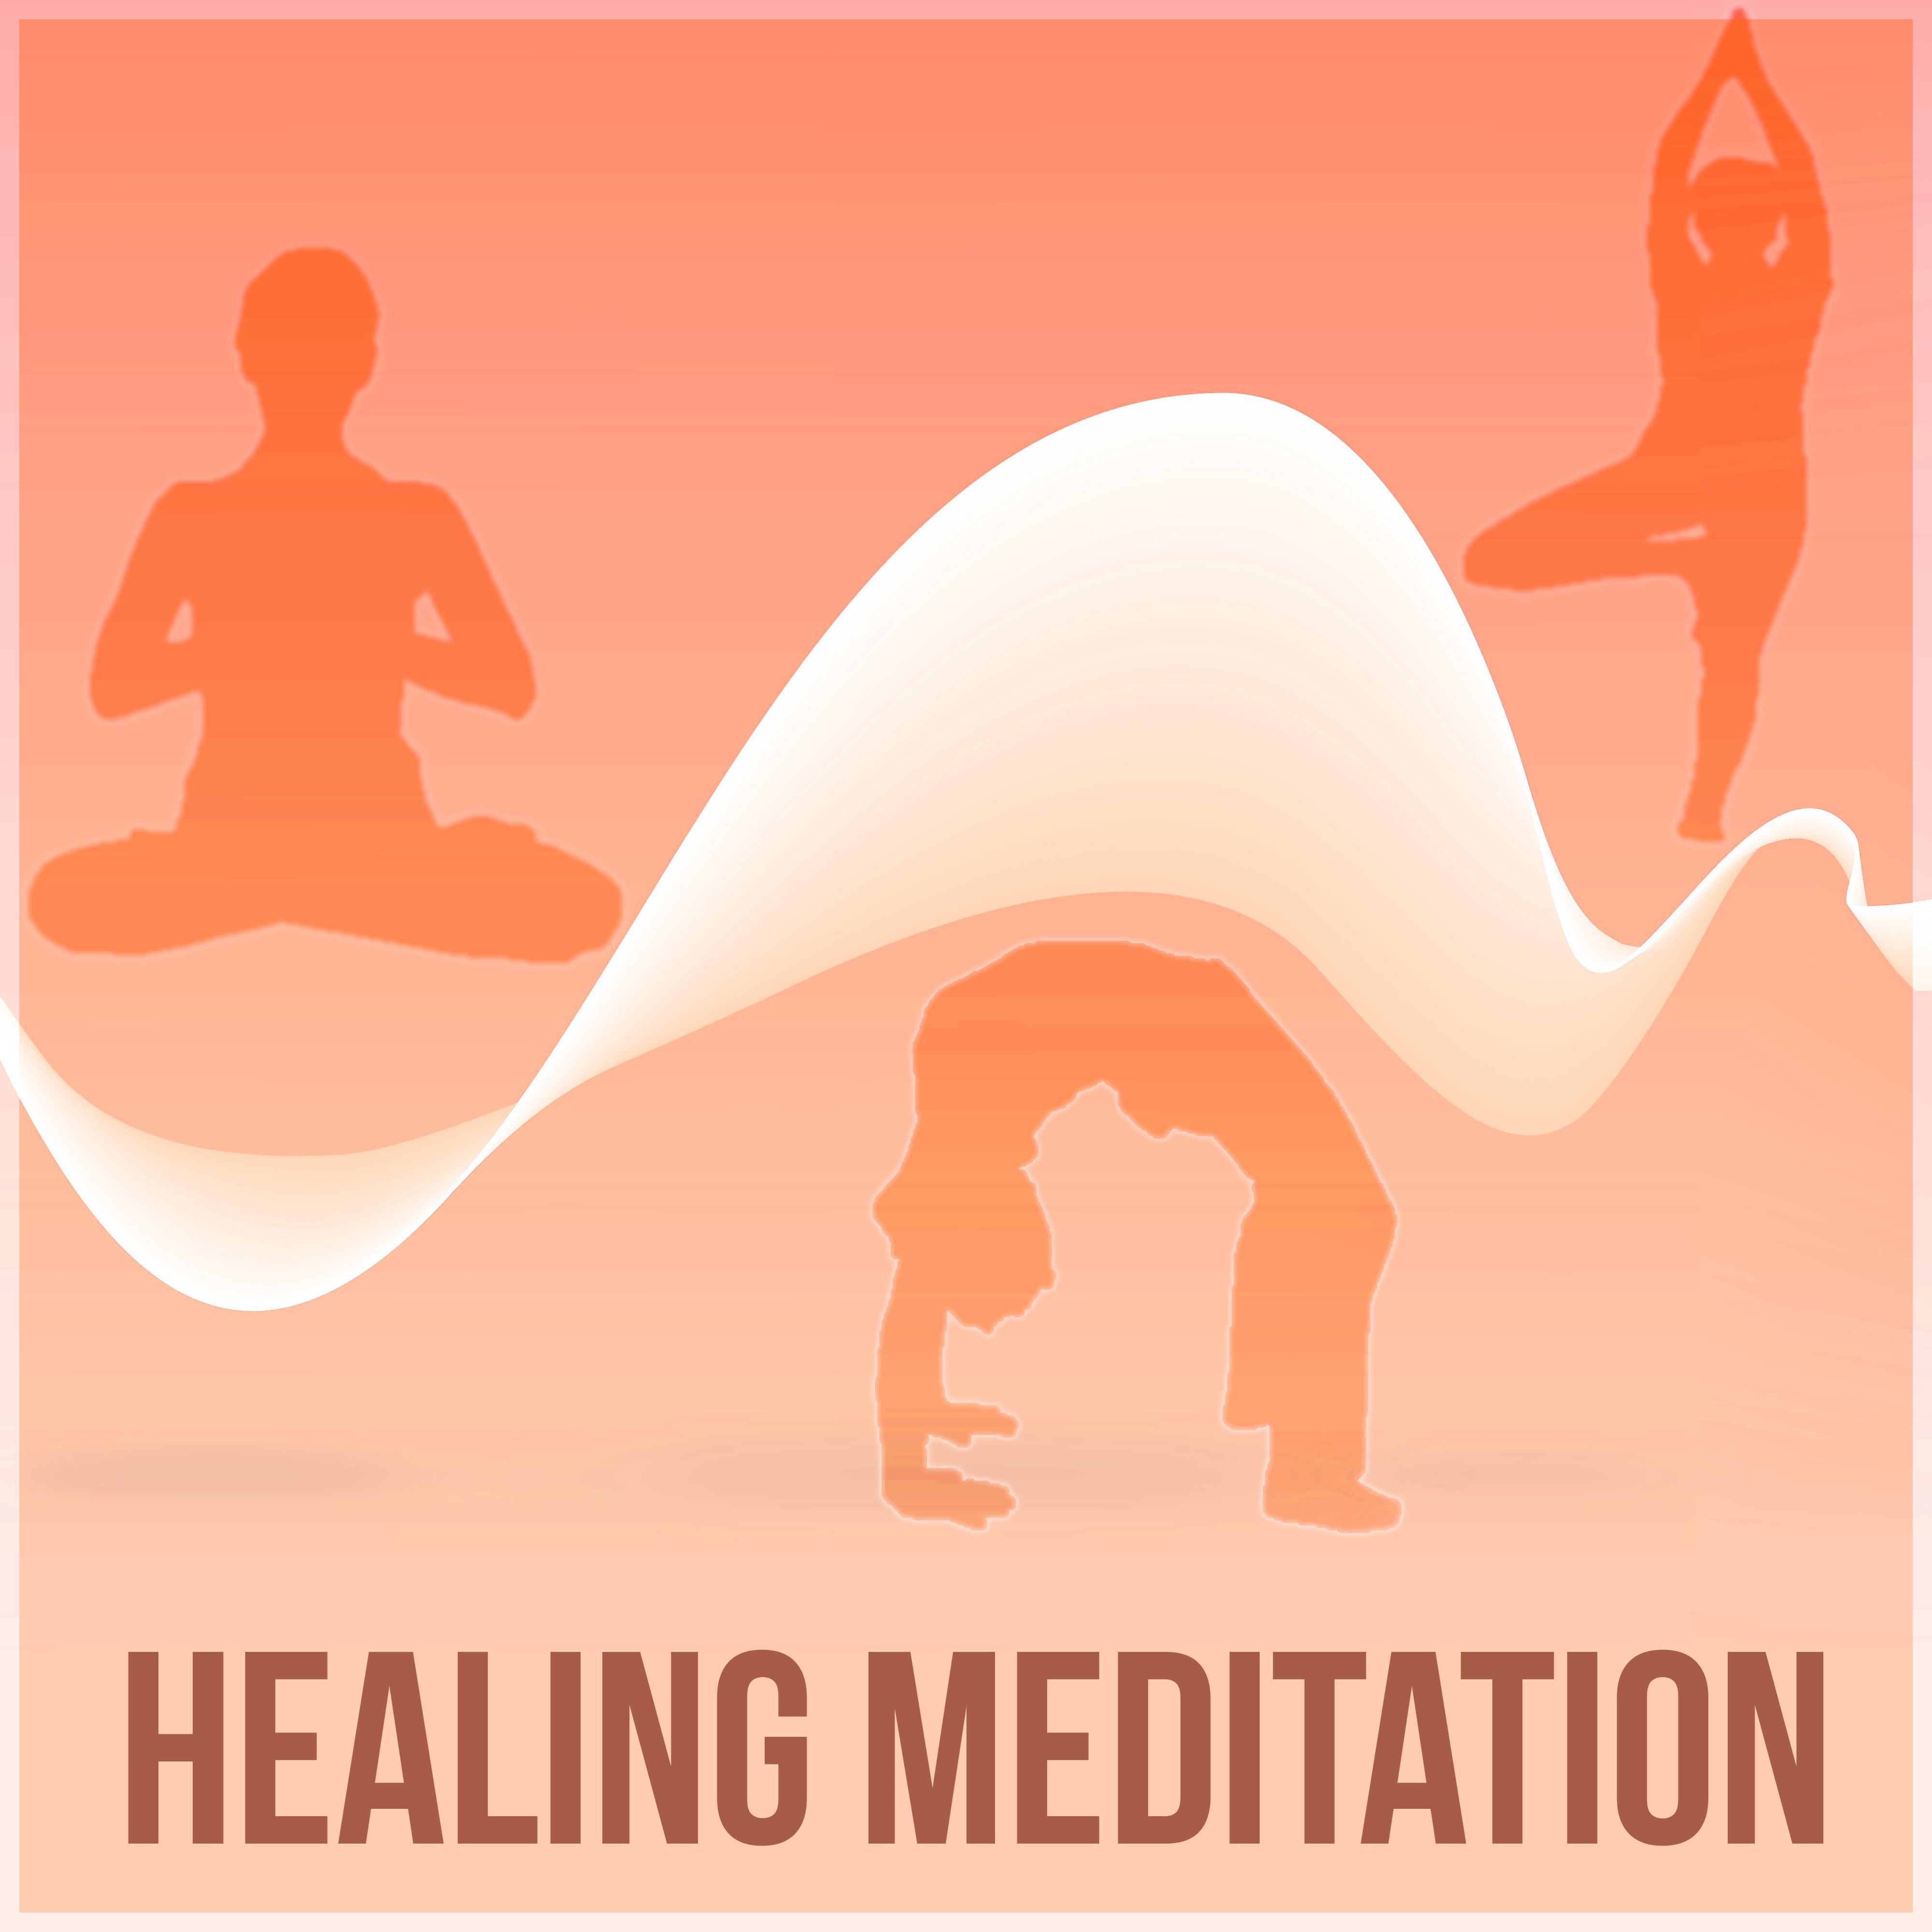 Healing Meditation – Deep Sounds for Meditation, Calm Music for Relaxation, Yoga Poses, Buddhist Meditation, Soul Healing, Mindfulness Meditation